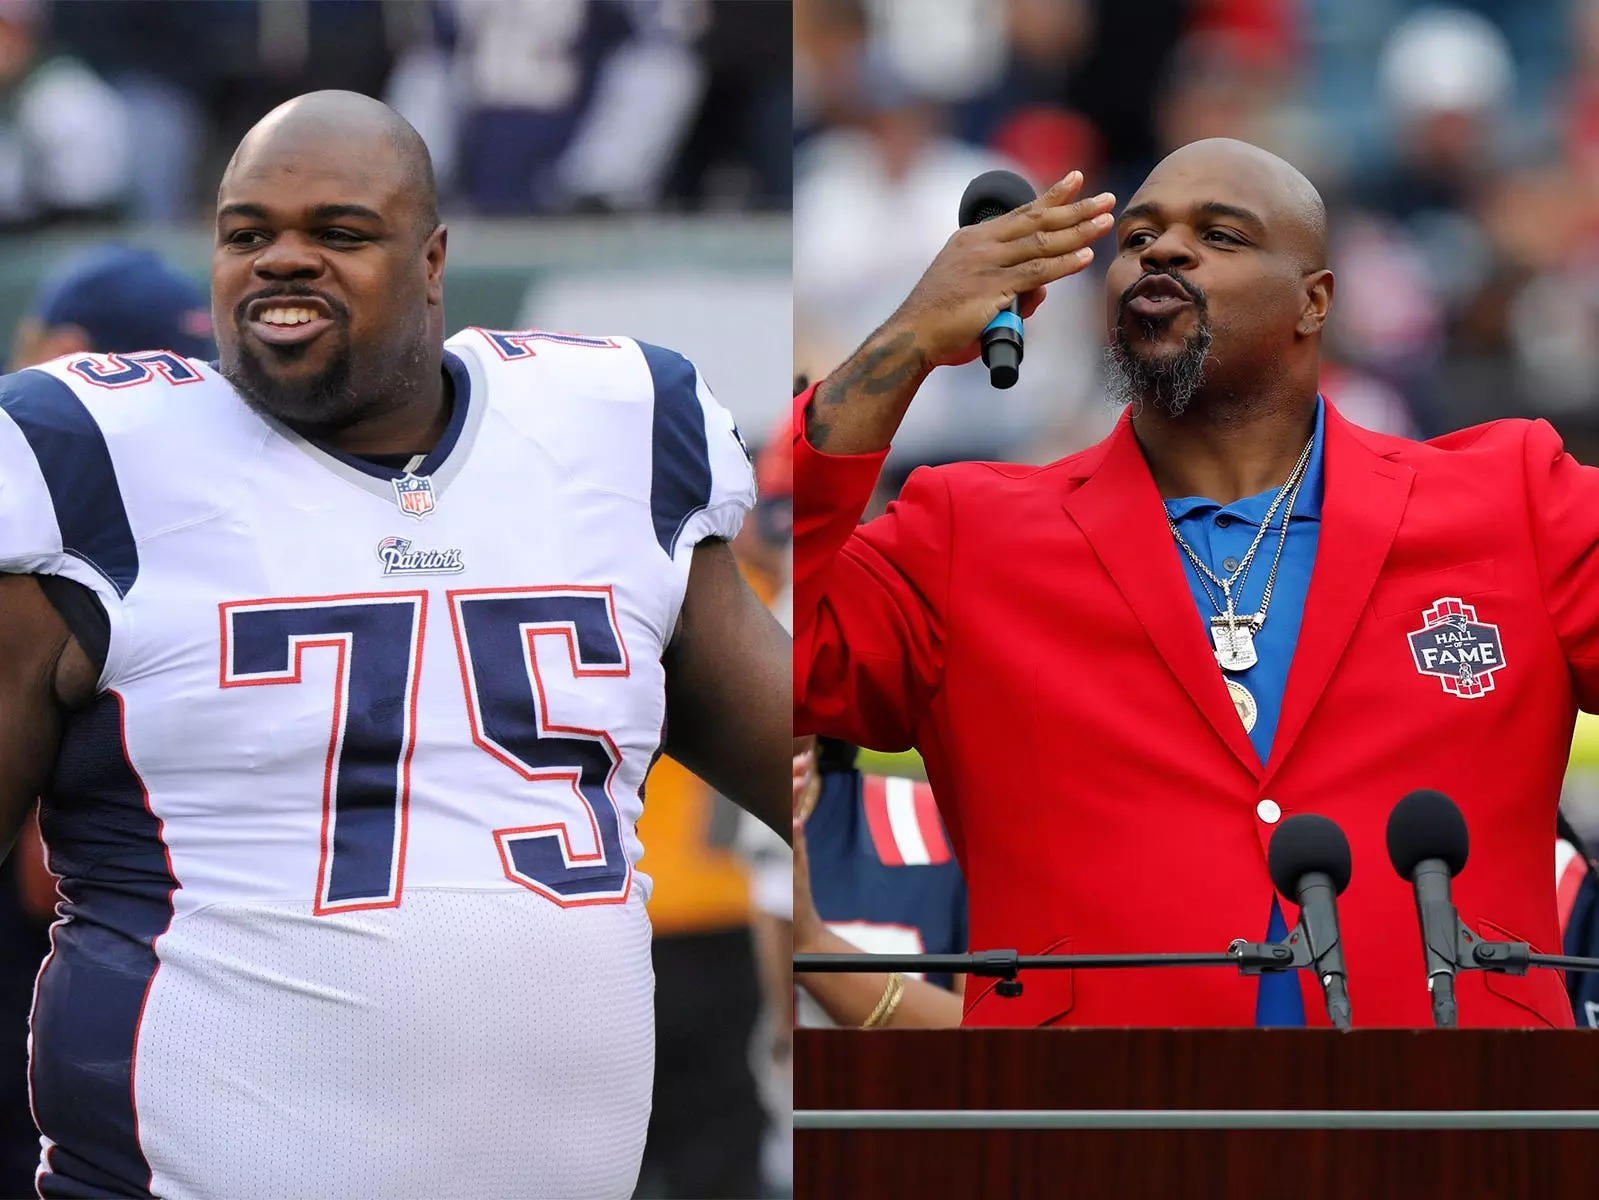 After signing one-day contract, Vince Wilfork retires as a Patriot